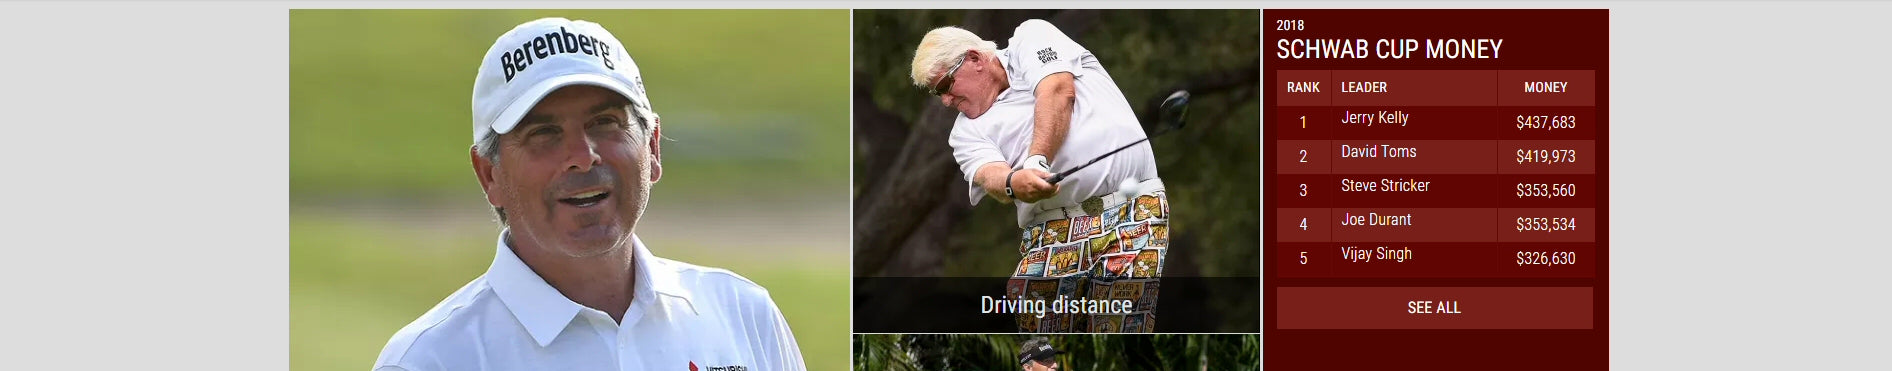 Follow Daly and Mediate on 2018 PGA Tour Champions